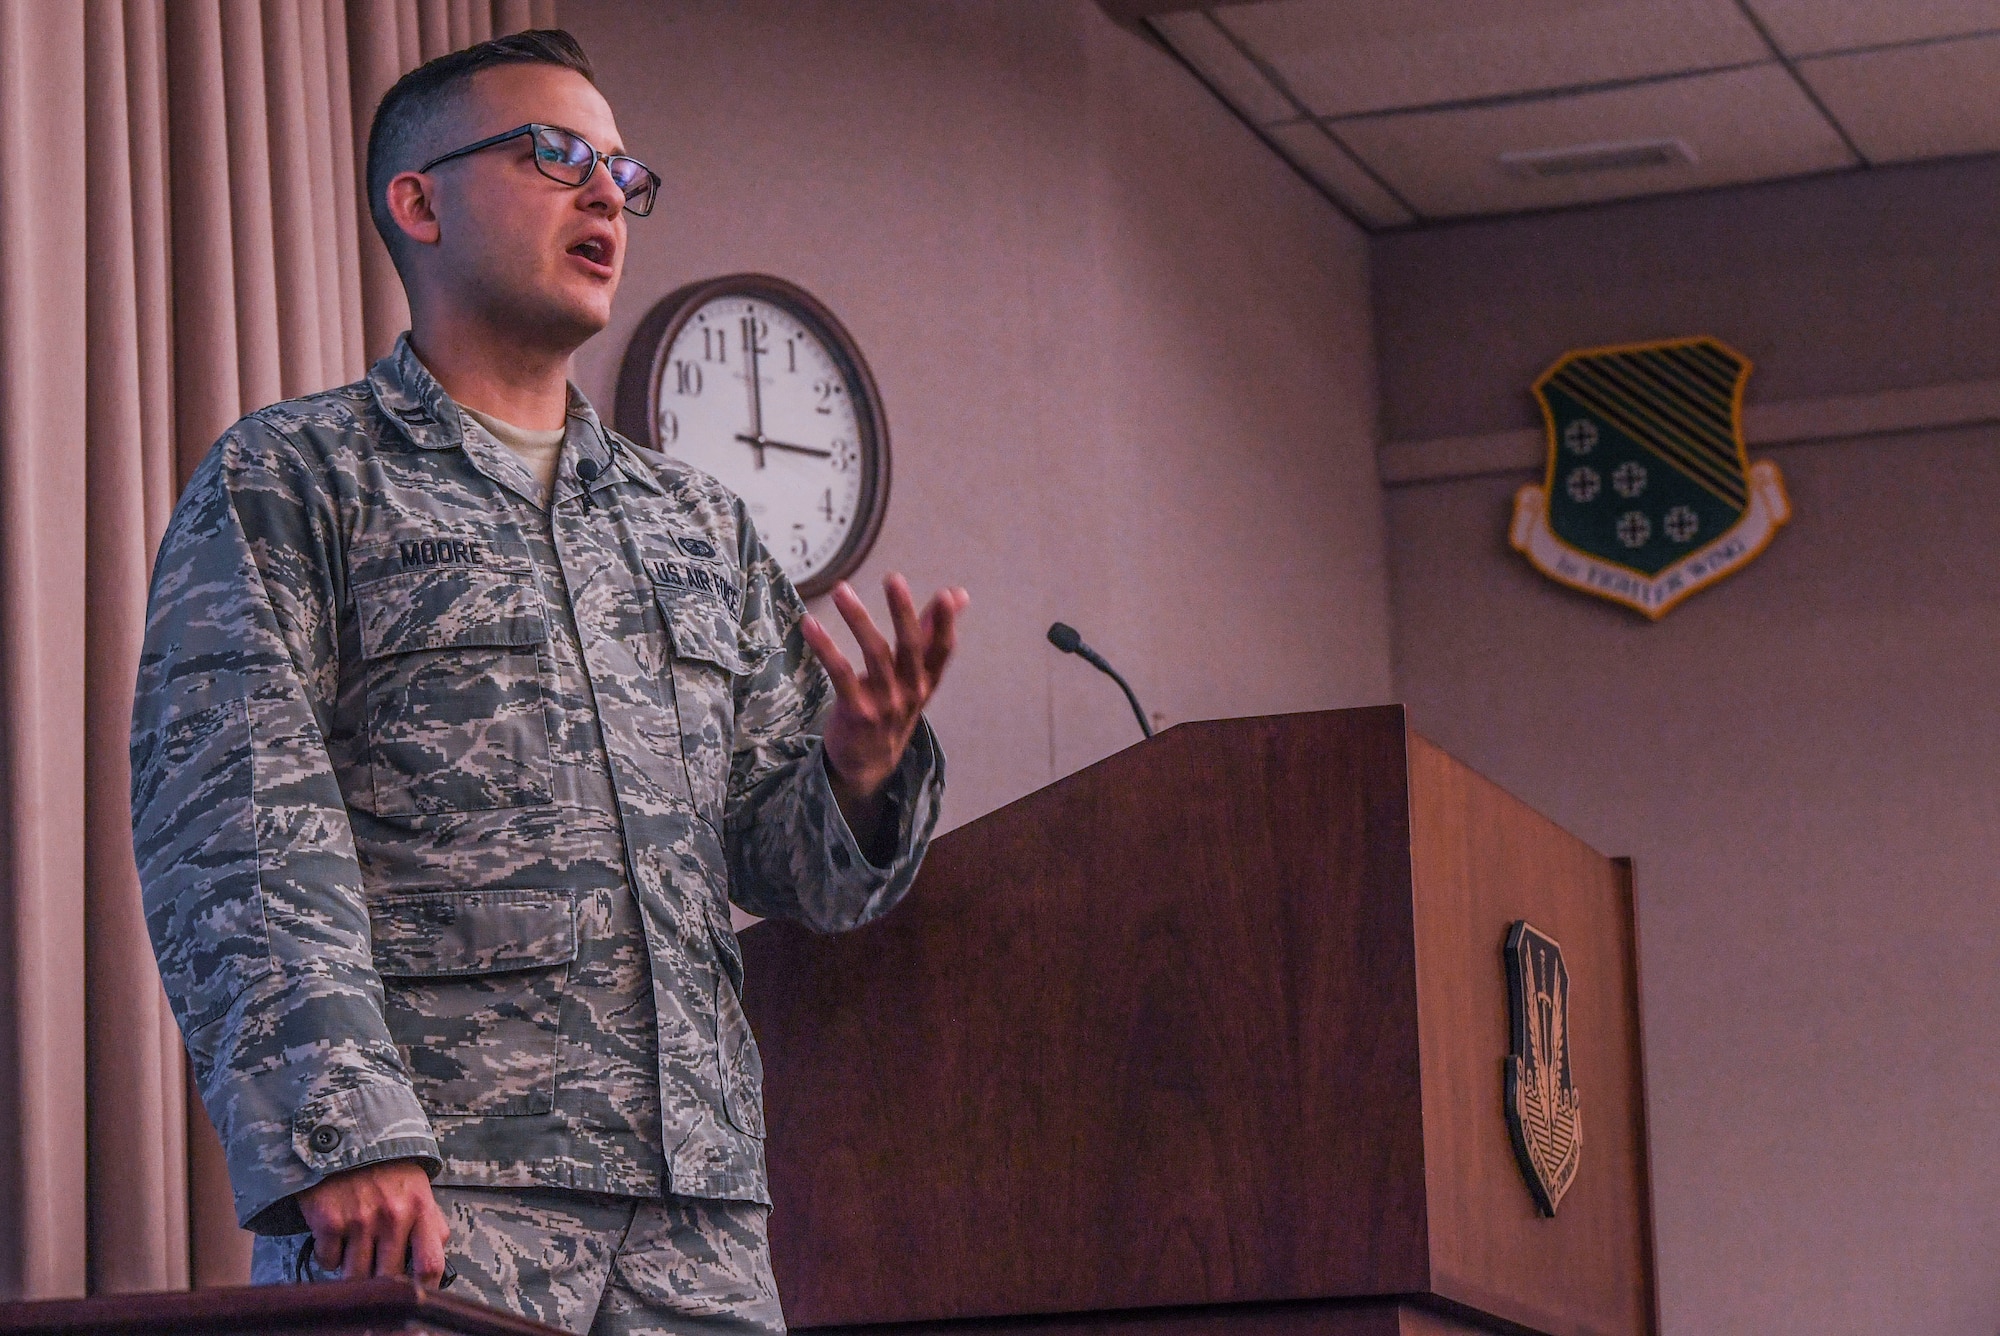 Capt. Tyler M. Moore, 67th Cyberspace Wing acquisitions officer, Joint Base San Antonio, Texas, articulates his idea to the judge’s panel during Air Combat Command’s 2020 Spark Tank competition at the Creech Conference Center on Joint Base Langley-Eustis, Virginia, Oct. 16, 2019. Moore pitched an idea called “Wholistic Care Management,” which he believes could sharpen the Air Force’s approach toward suicide prevention to ensure readiness of the force. (U.S. Air Force photo by Tech. Sgt. Nick Wilson)